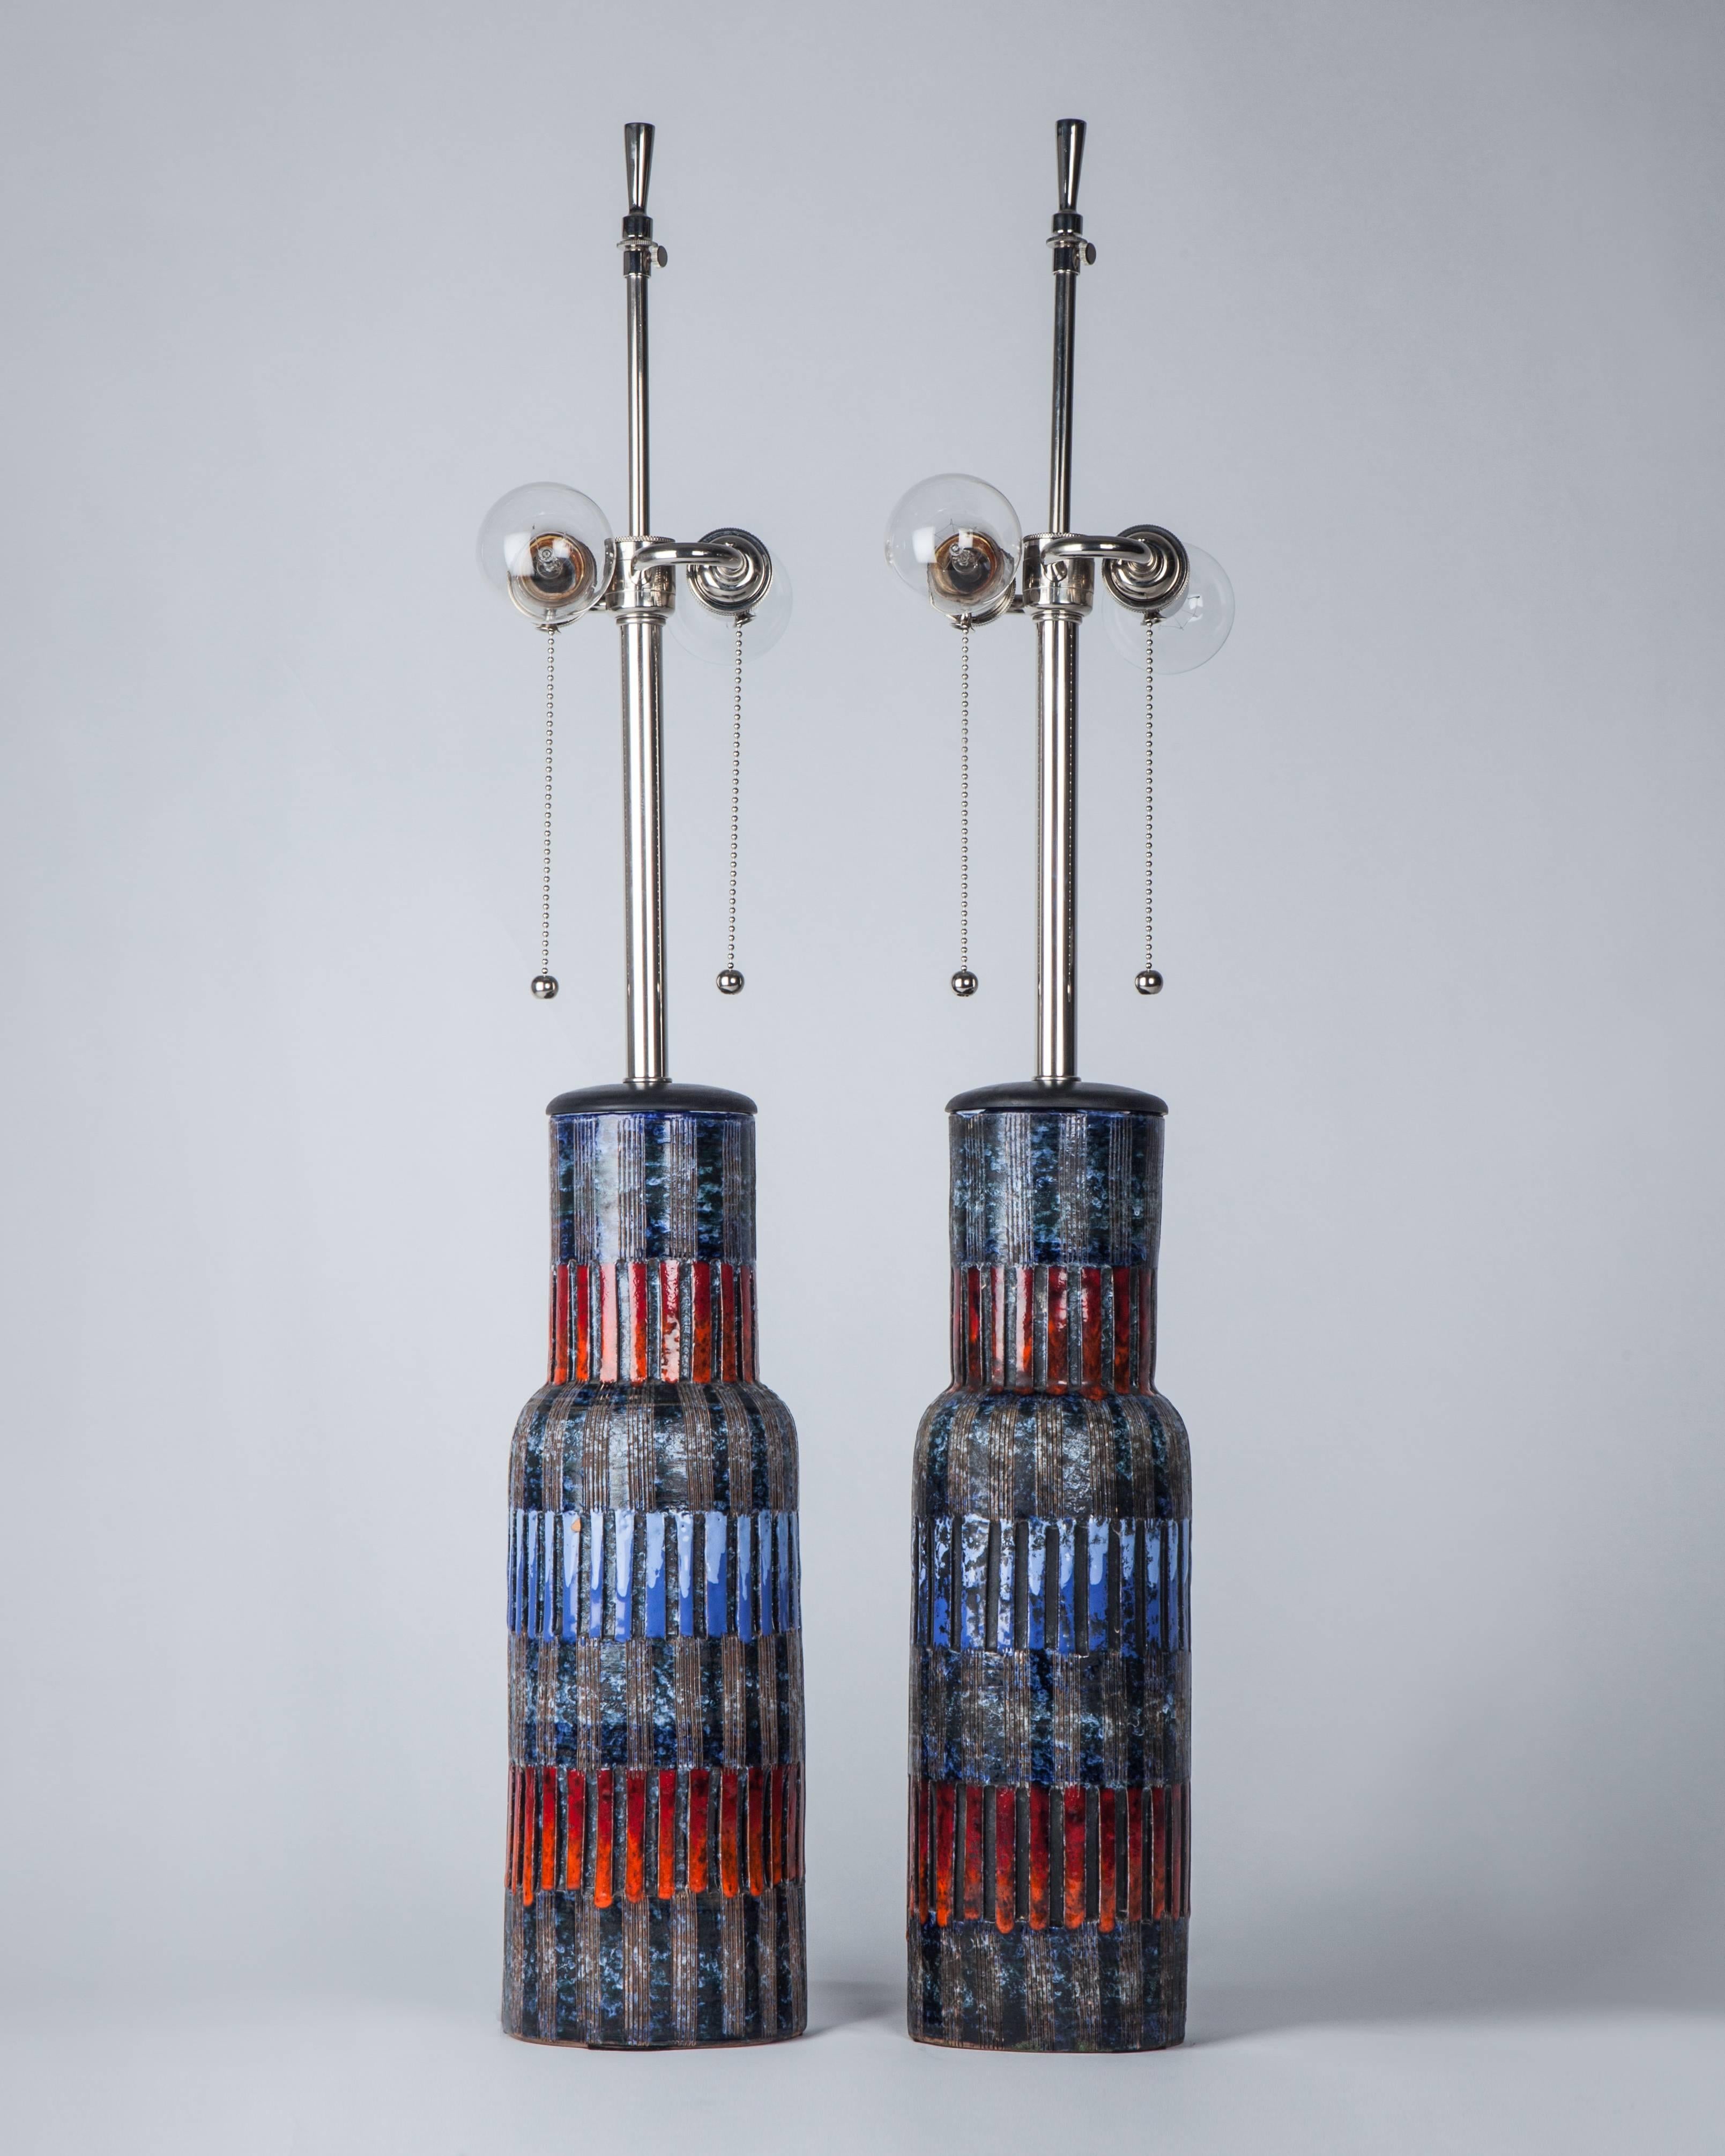 A pair of vintage ceramic table lamps with blue, red and charcoal glaze over incised vertical grooves on a shouldered cylindrical form. With dark walnut vase caps and polished nickel fittings. Signed Raymor by Aldo Londi for the Italian maker